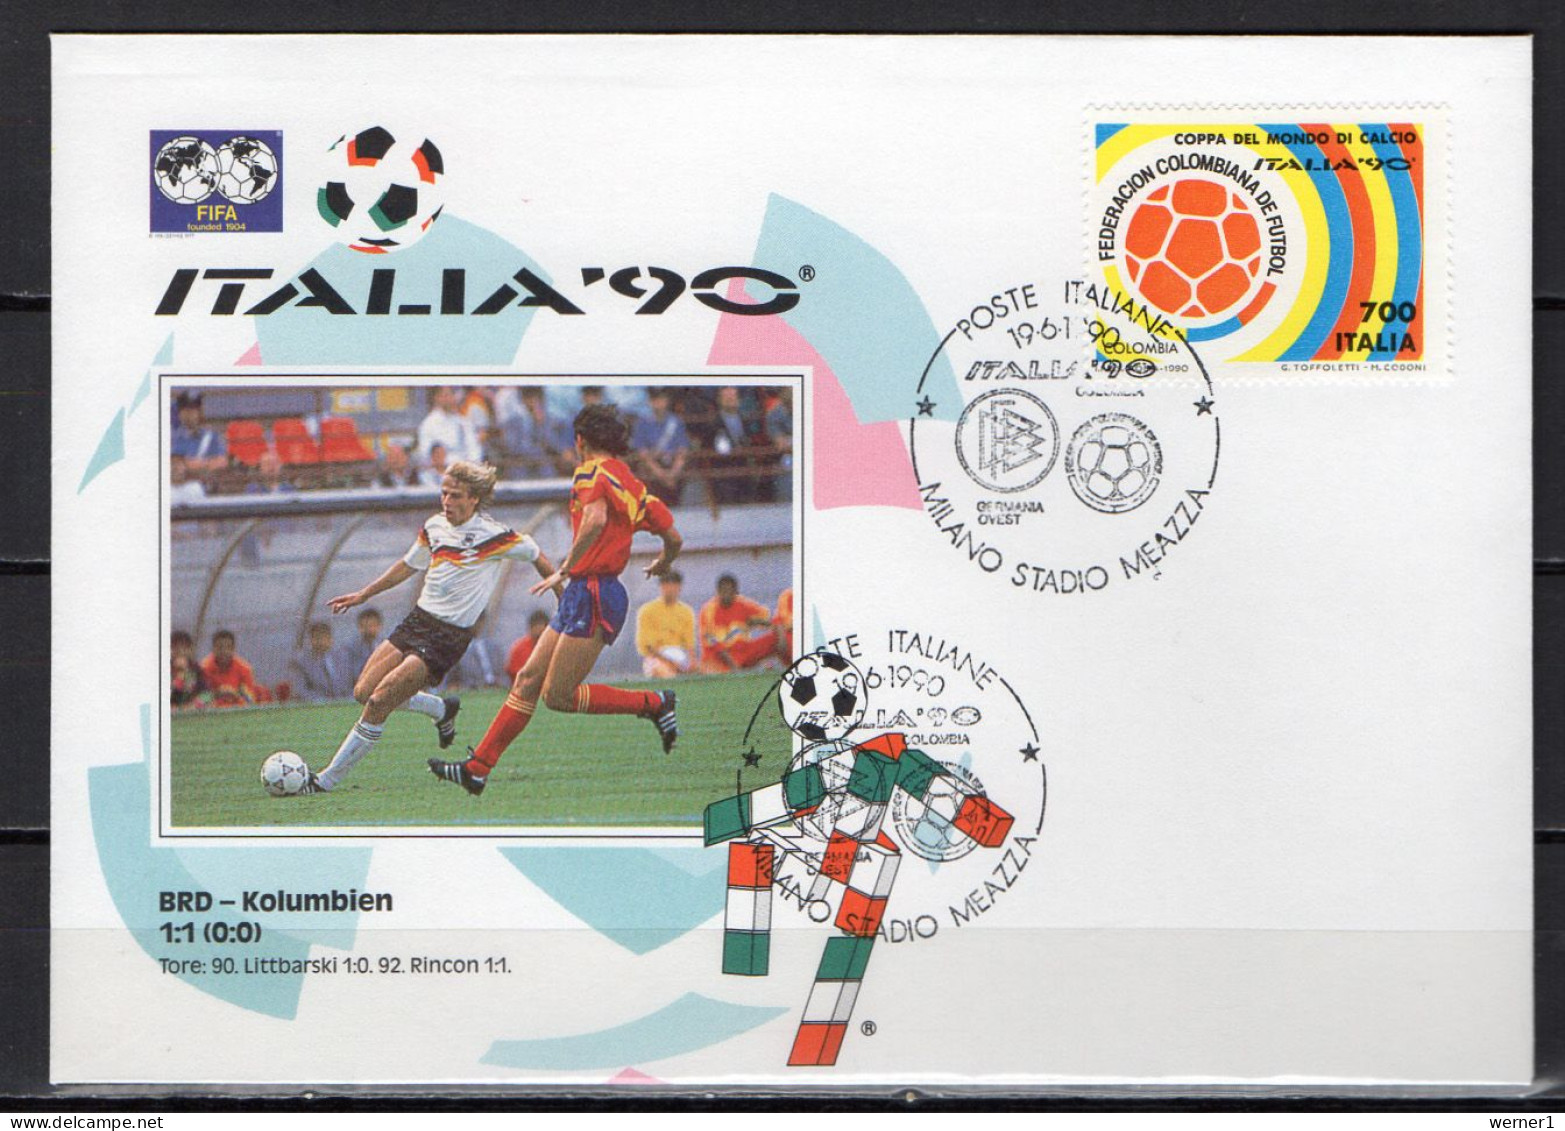 Italy 1990 Football Soccer World Cup Commemorative Cover Final Match Germany - Colombia 1 : 1 - 1990 – Italia